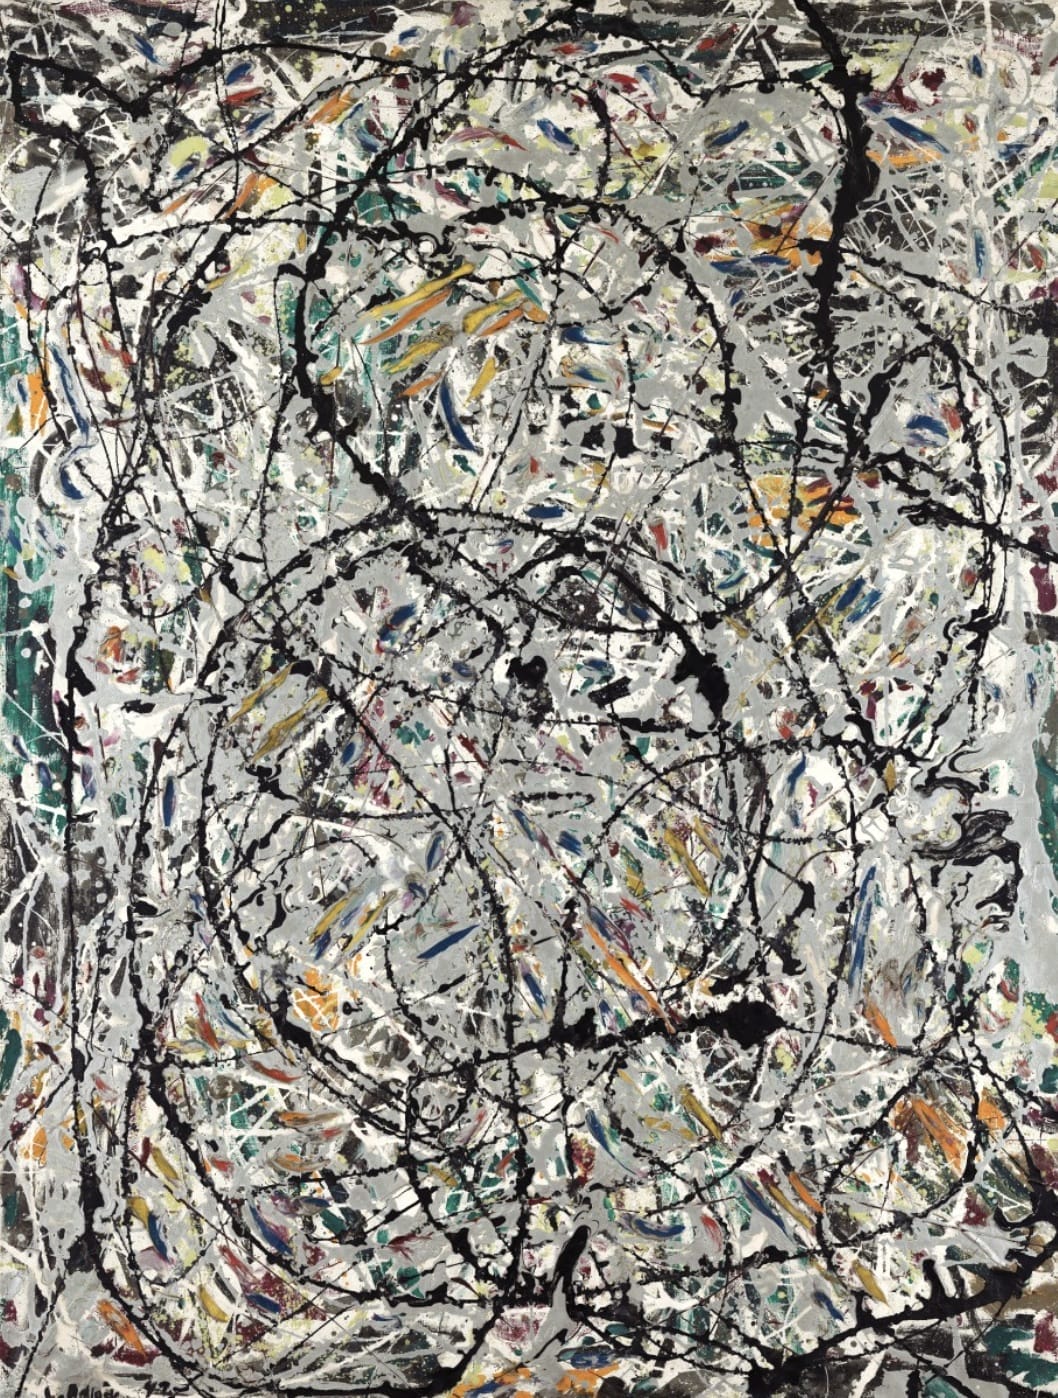 Watery Paths by Jackson Pollock, a painting from the abstract expressionism movement